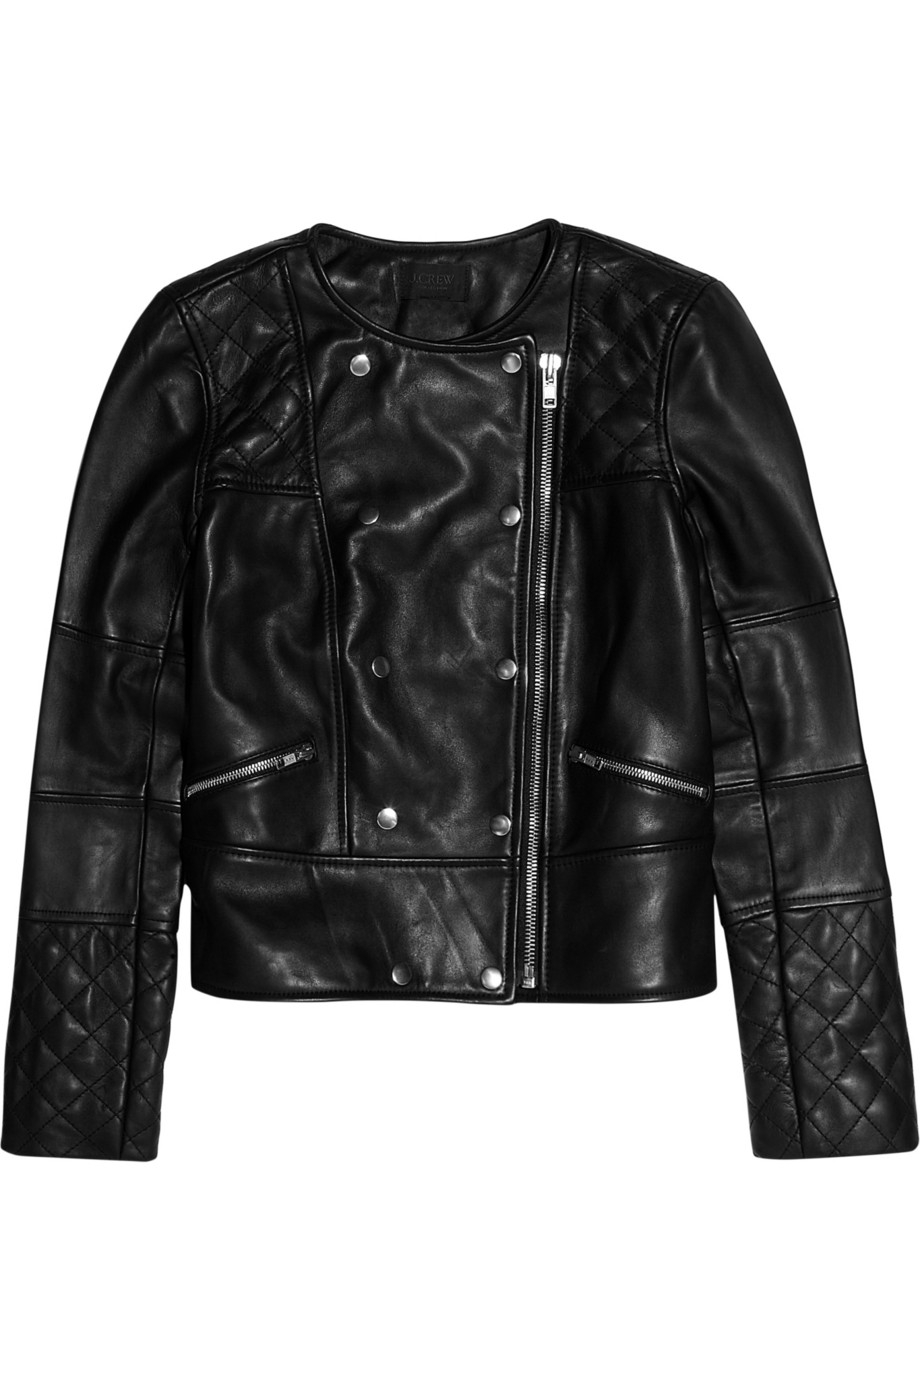 J.crew Collection Quilted Leather Biker Jacket in Black | Lyst